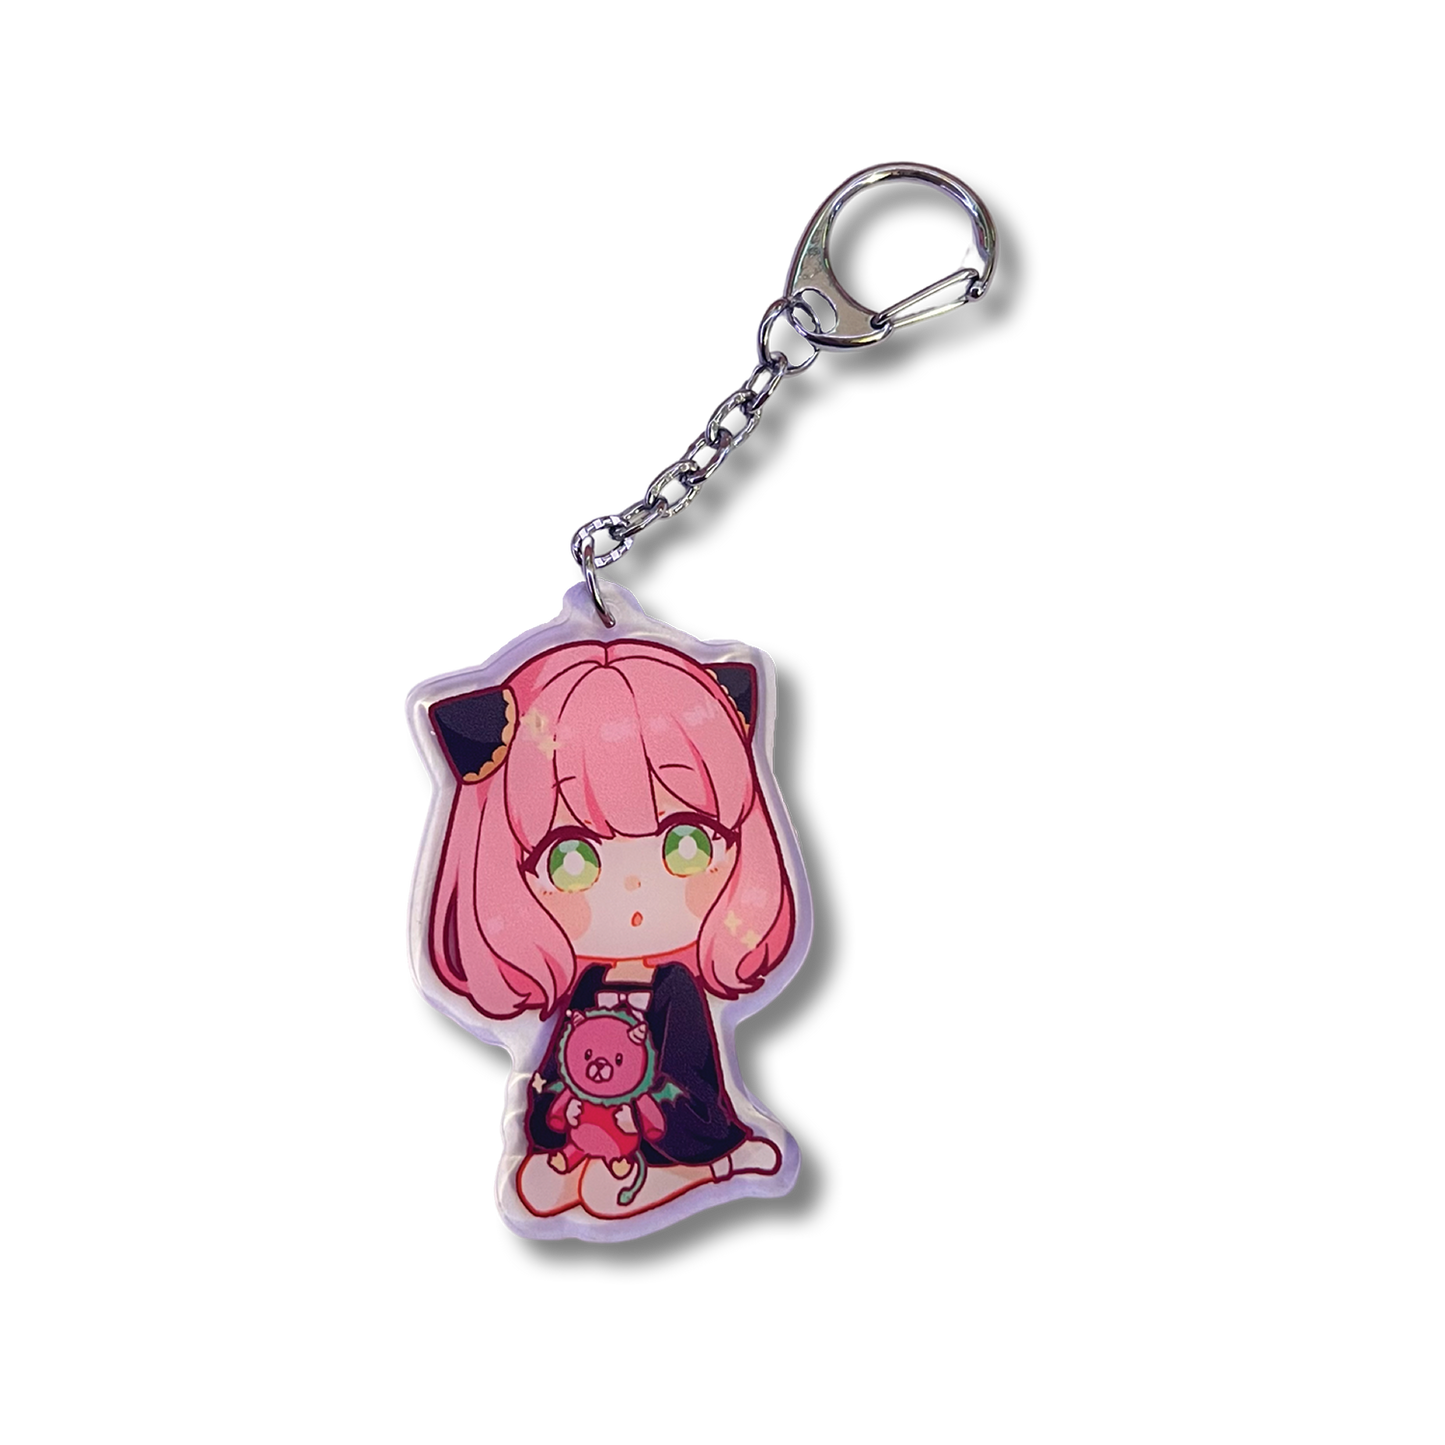 Anya Plushie Keychain design features Anya Forger from Spy x Family holding a chimera plushie in a sitting position.